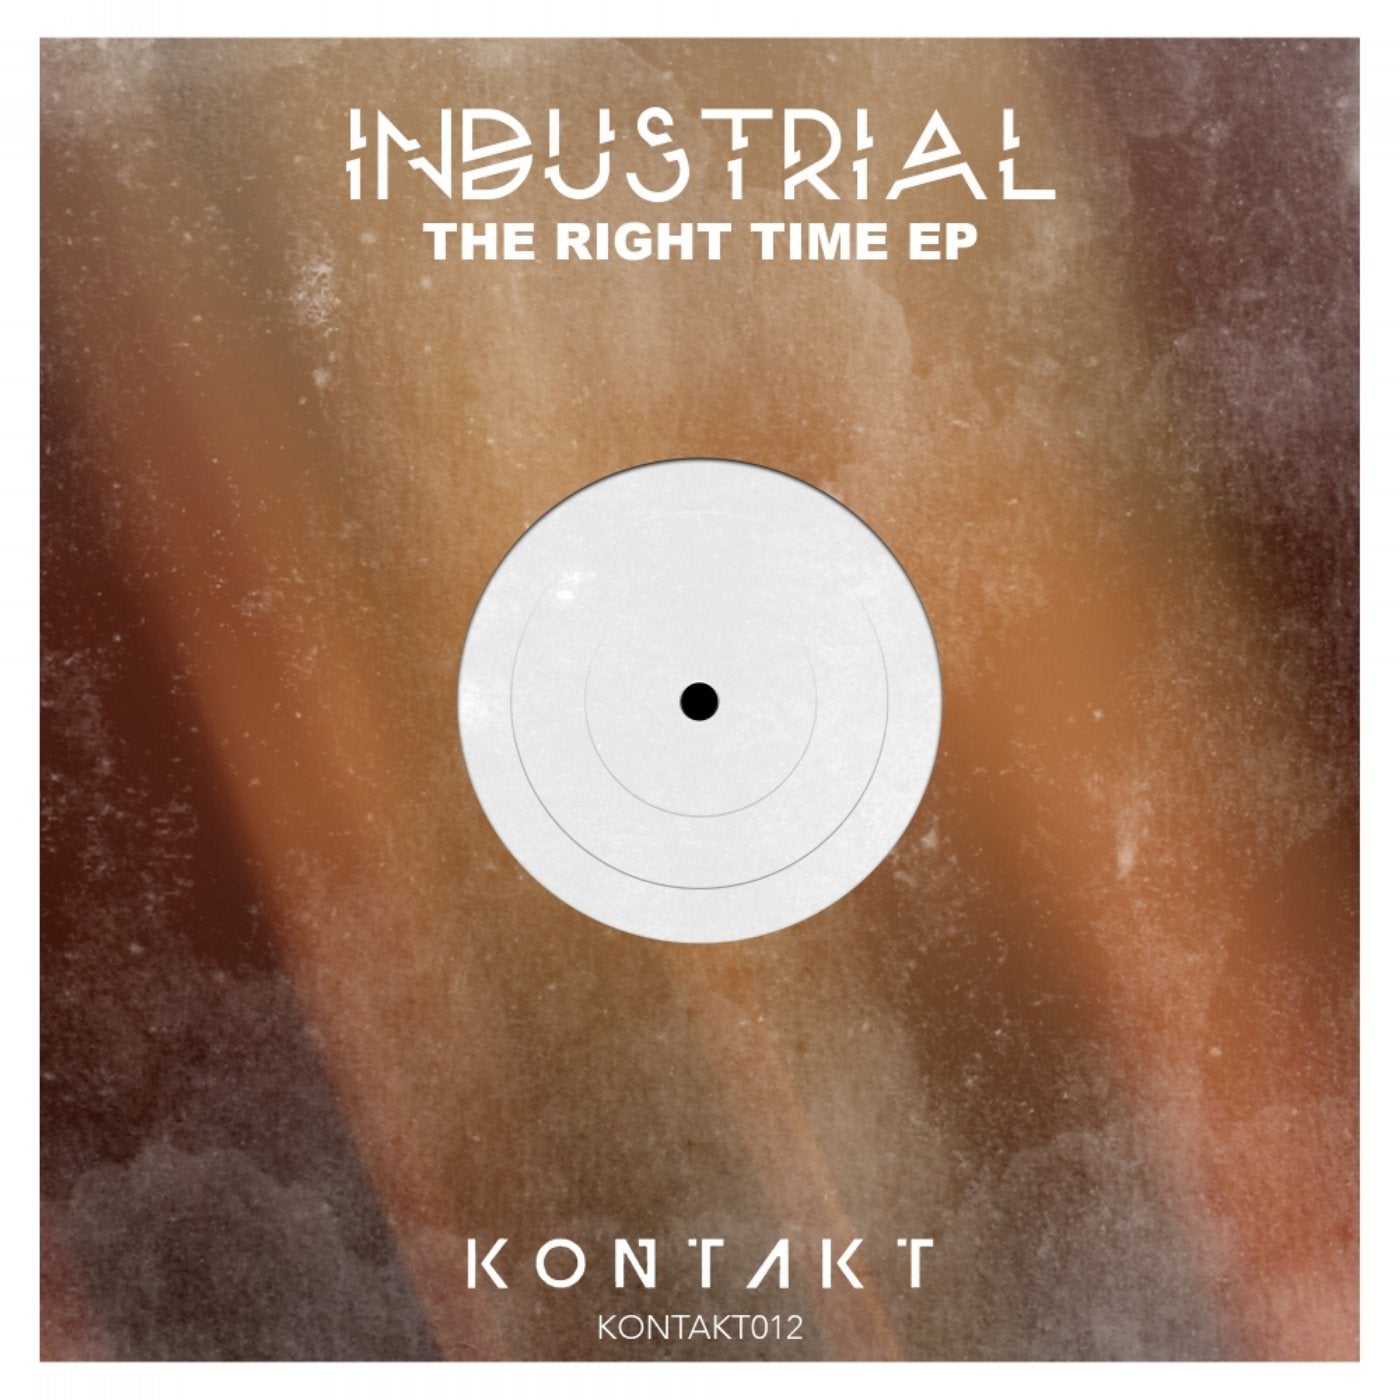 The Right Time EP